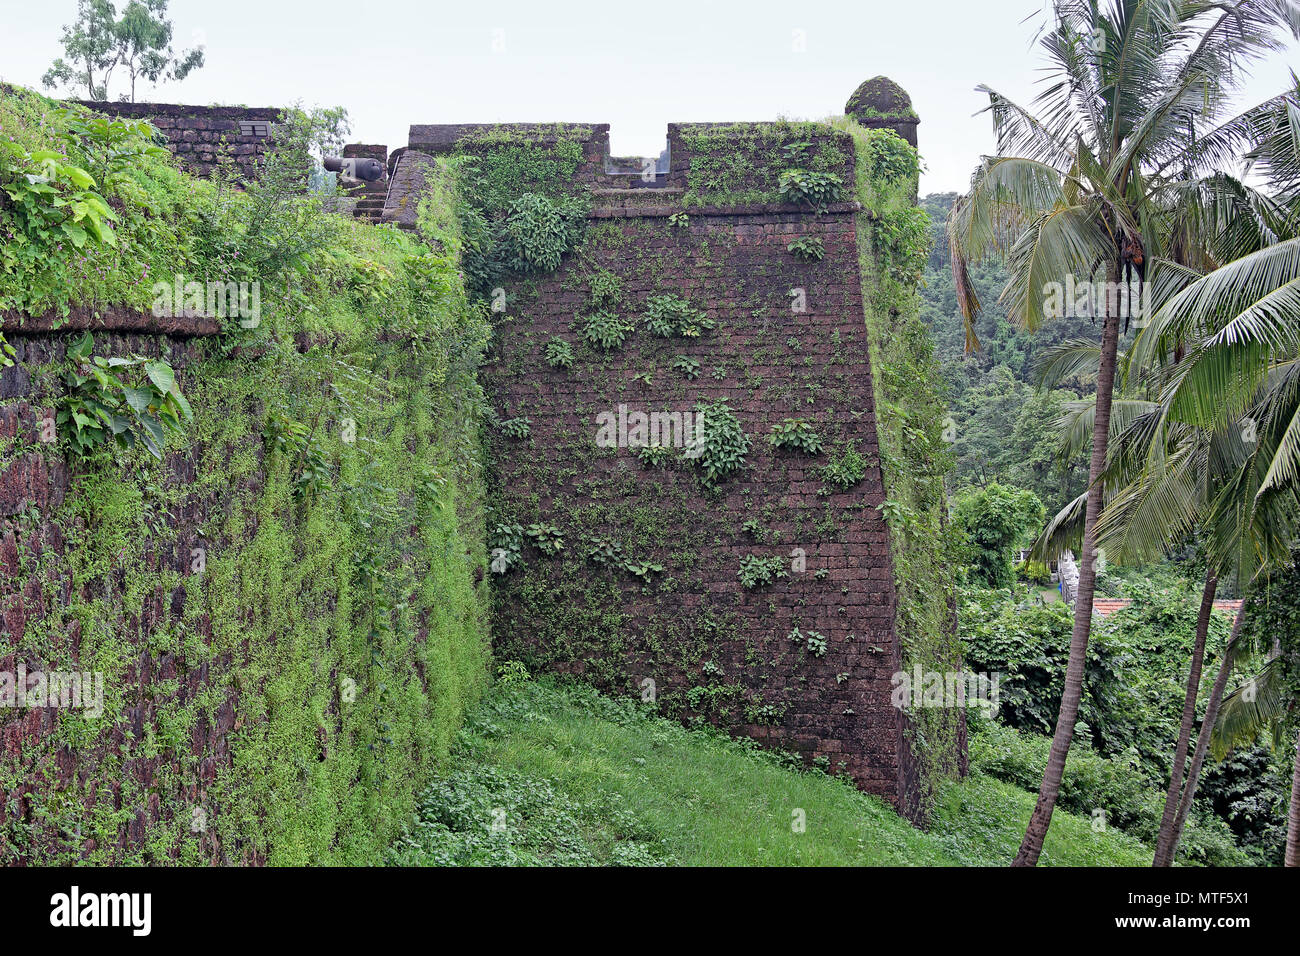 Turret and outer wall made of laterite stone bricks, with grass and shrub growth, of Portuguese era Reis Magos Fort in Goa, India. Stock Photo